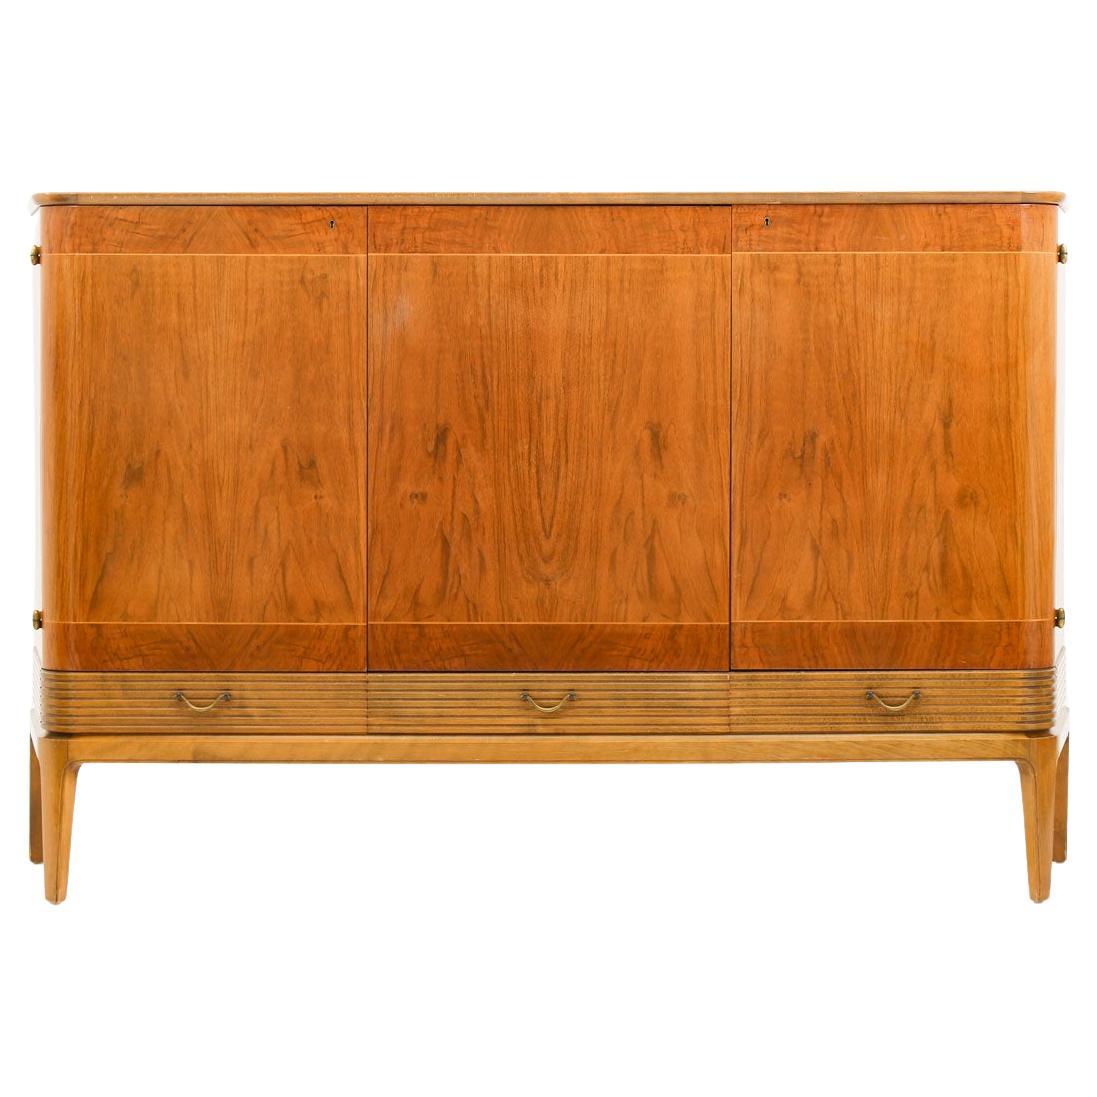 Swedish Modern Cabinet in the Style of Axel Larsson, 1940s